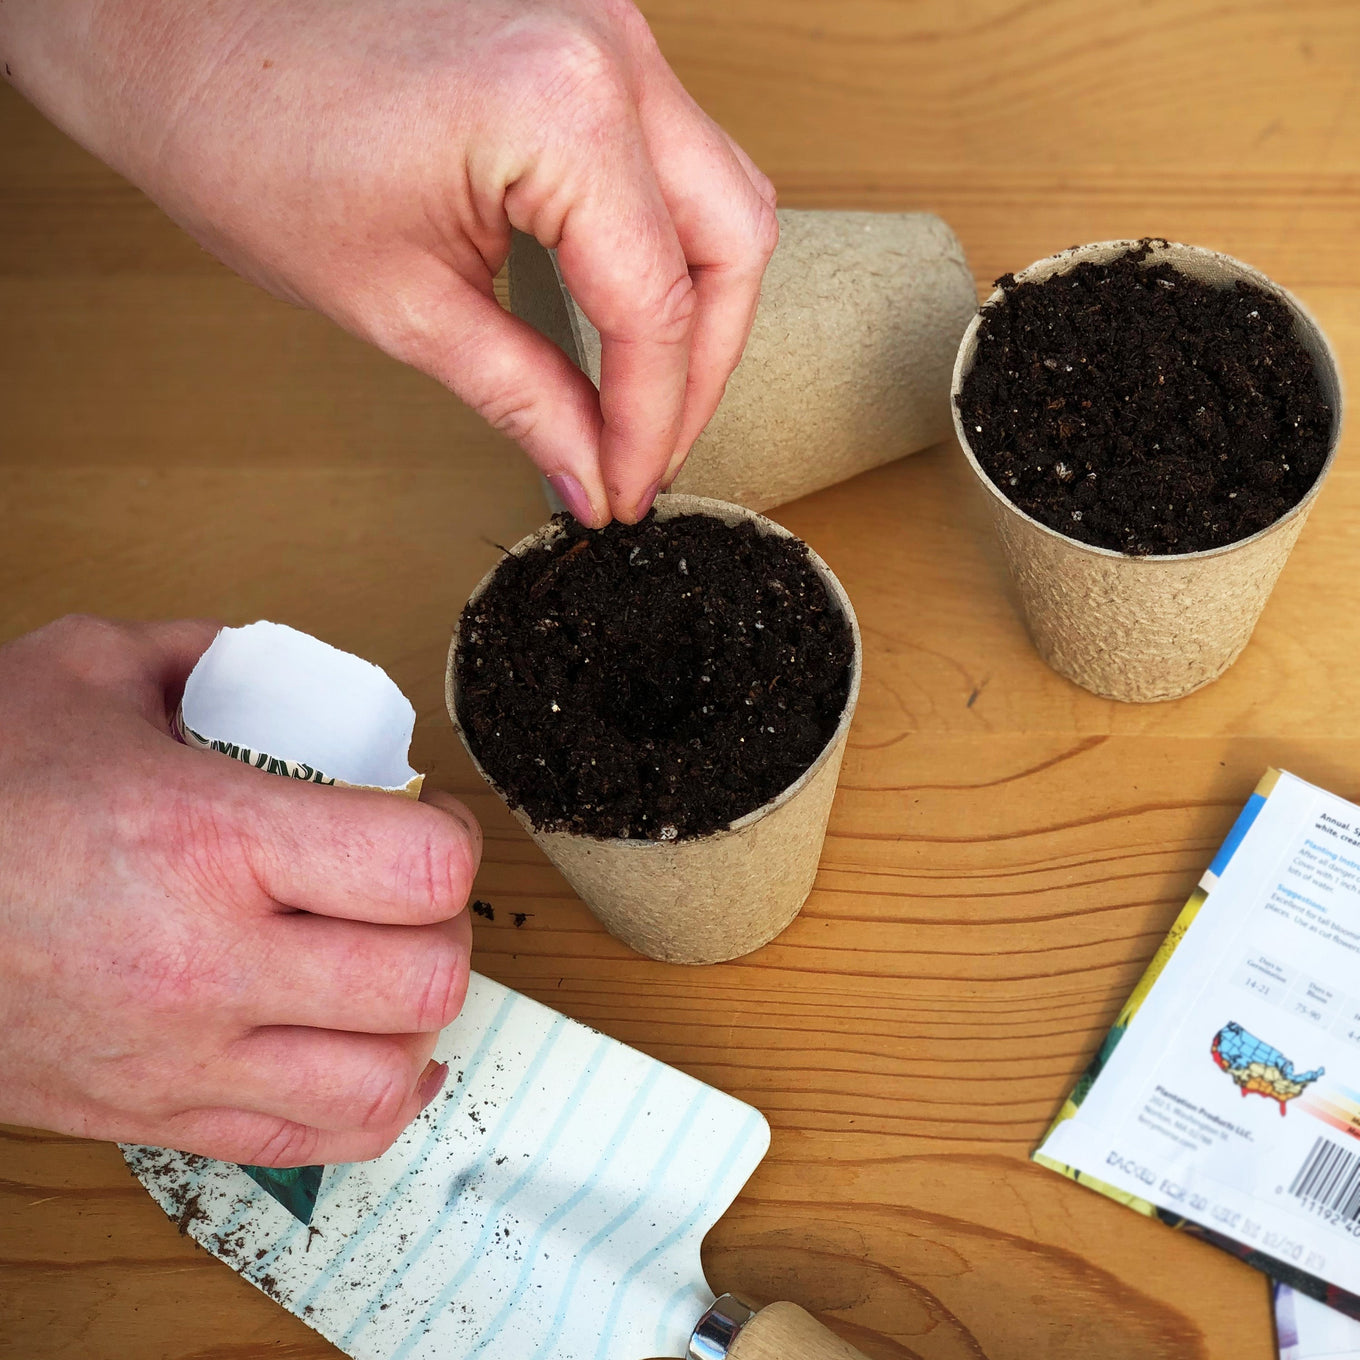 Start Purple Tomatillo seeds in biodegradable paper or peat pots.